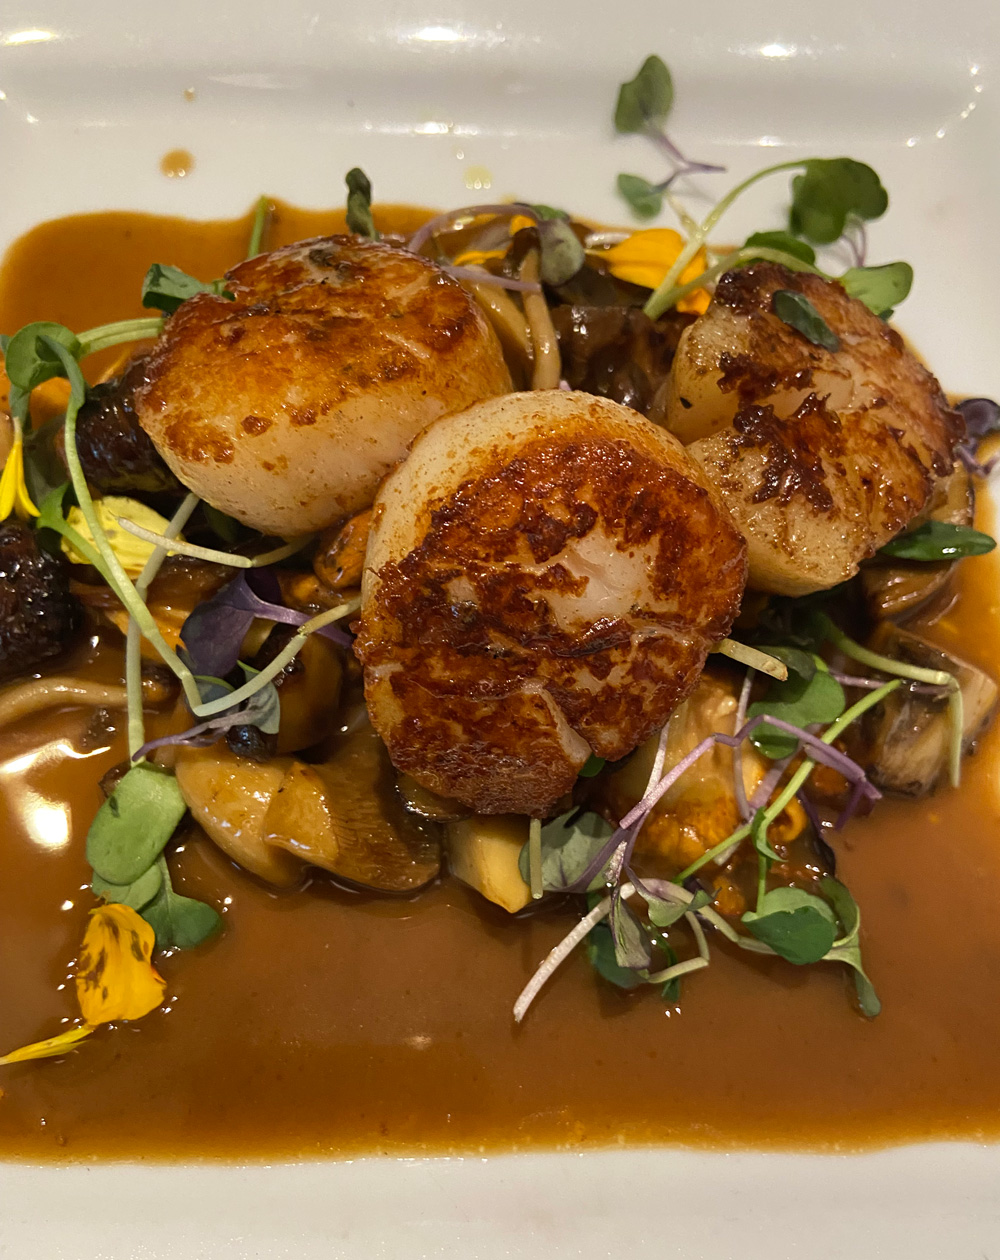 Scallops on a plate at Veloute at Palace Pier